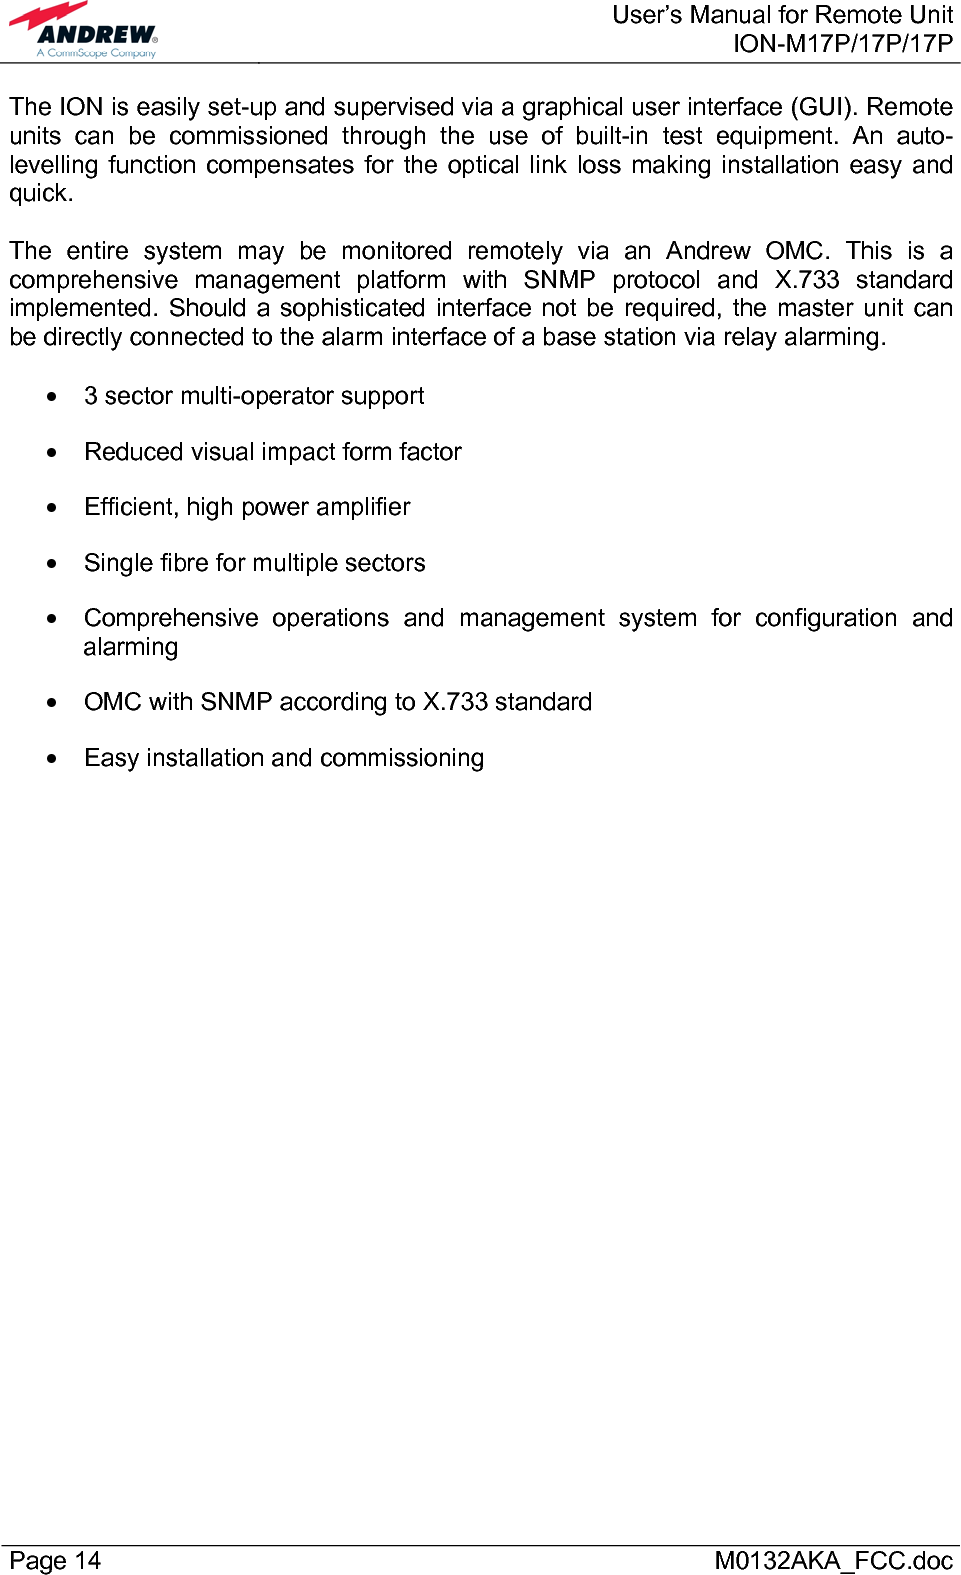  User’s Manual for Remote UnitION-M17P/17P/17P Page 14      M0132AKA_FCC.doc The ION is easily set-up and supervised via a graphical user interface (GUI). Remote units can be commissioned through the use of built-in test equipment. An auto-levelling function compensates for the optical link loss making installation easy and quick.  The entire system may be monitored remotely via an Andrew OMC. This is a comprehensive management platform with SNMP protocol and X.733 standard implemented. Should a sophisticated interface not be required, the master unit can be directly connected to the alarm interface of a base station via relay alarming.  •  3 sector multi-operator support •  Reduced visual impact form factor •  Efficient, high power amplifier •  Single fibre for multiple sectors  •  Comprehensive operations and management system for configuration and alarming •  OMC with SNMP according to X.733 standard •  Easy installation and commissioning  